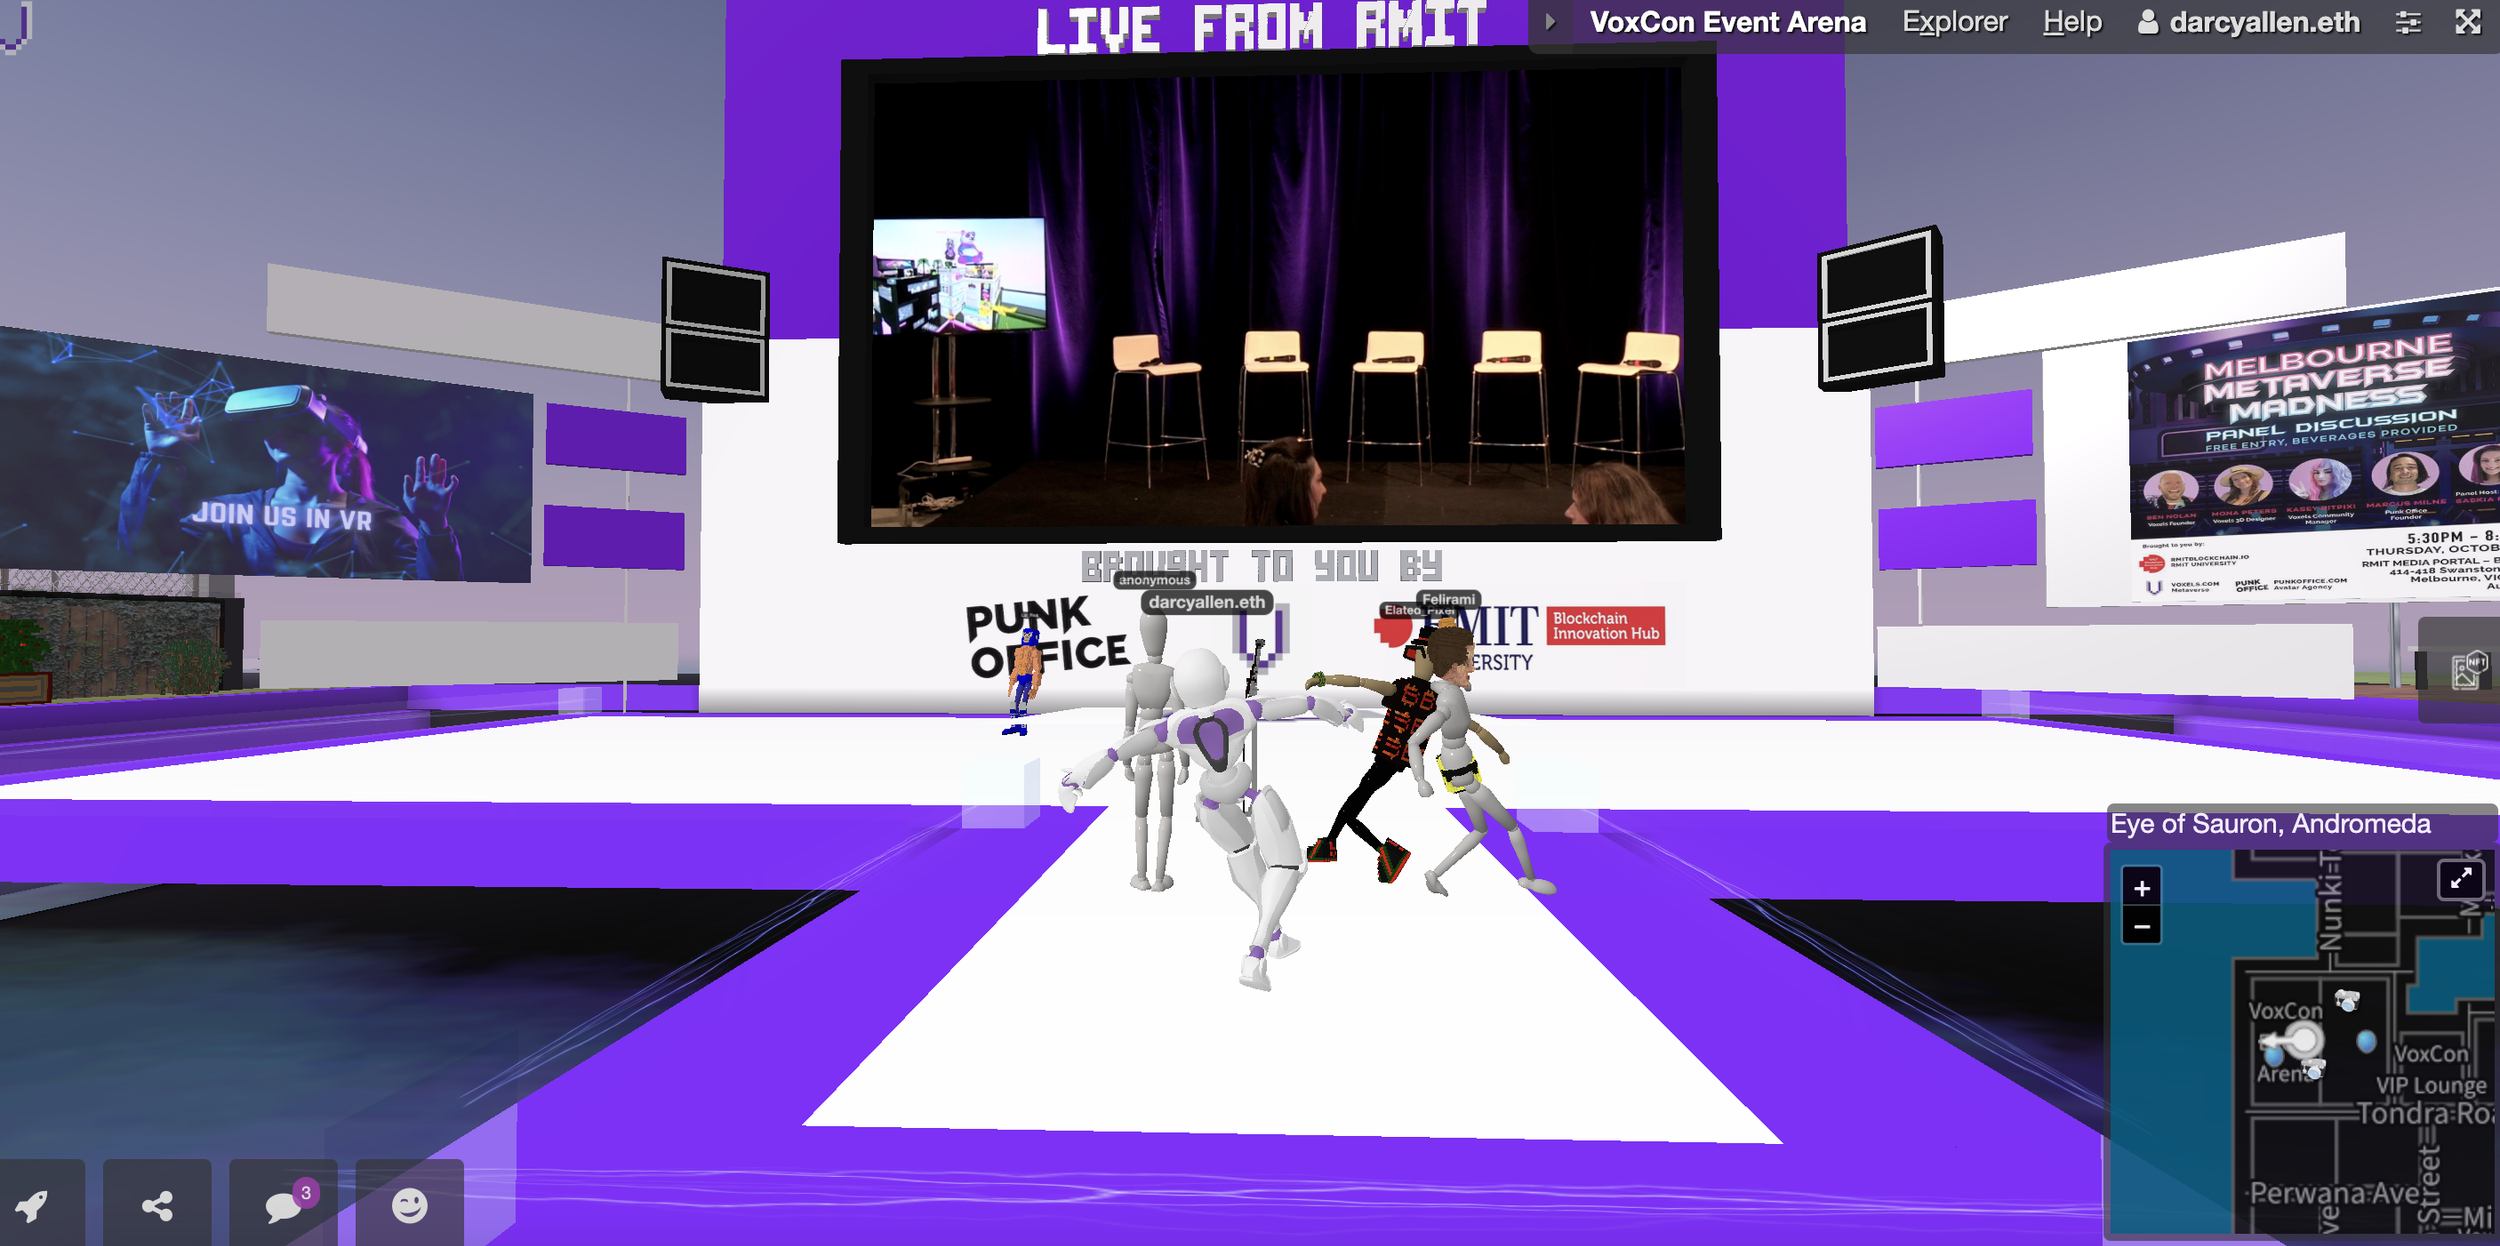 Attendees enter the virtual event arena